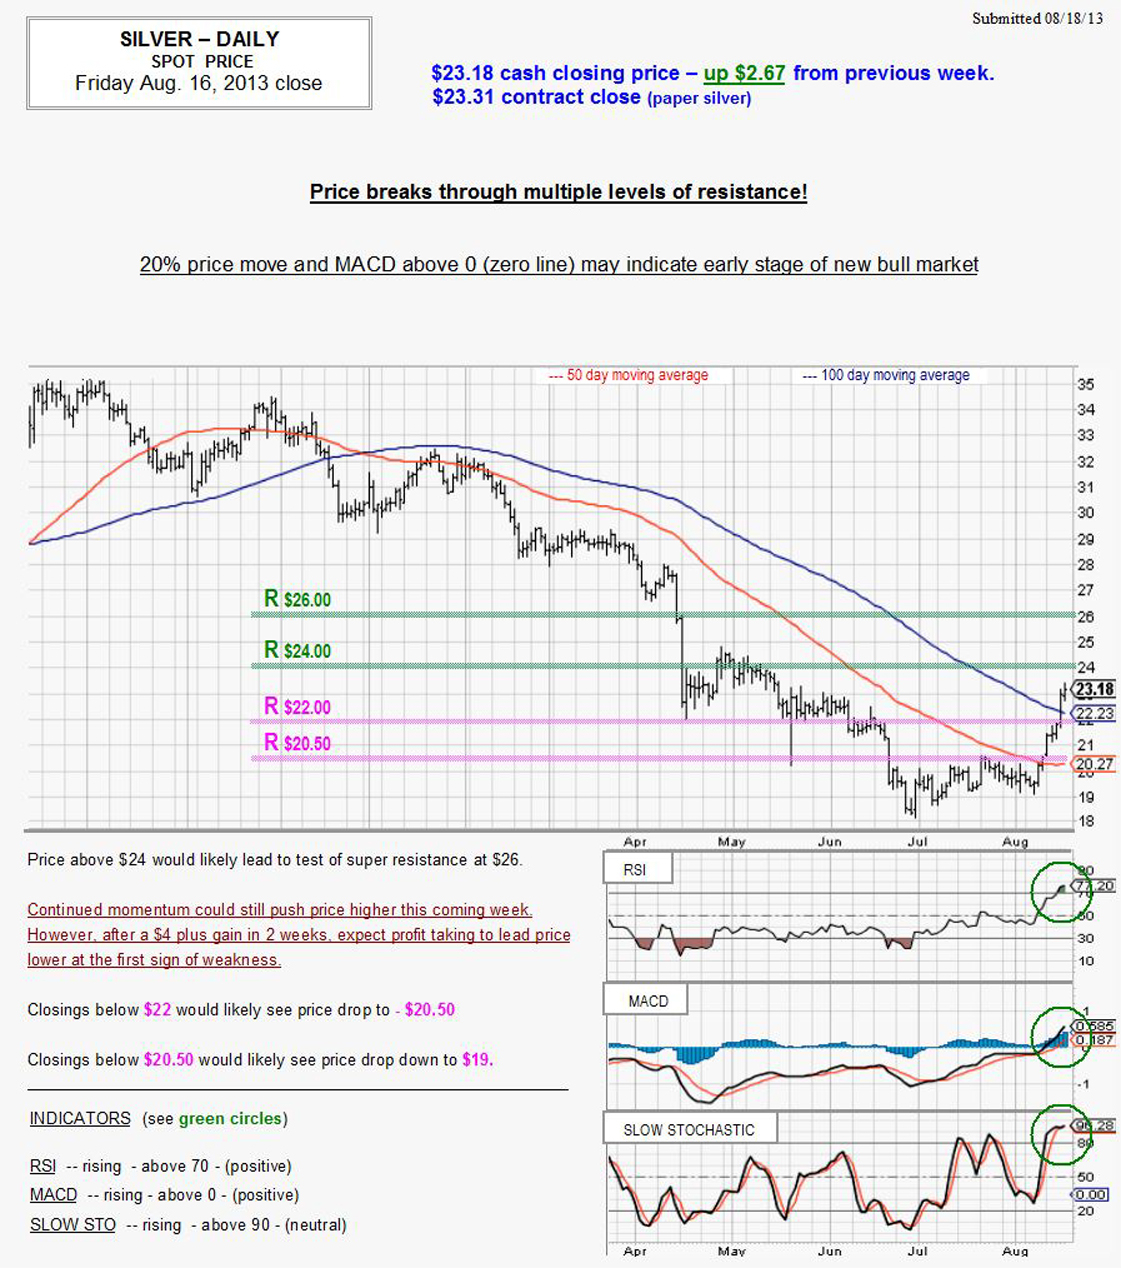 Aug 16, 2013 chart & commentary